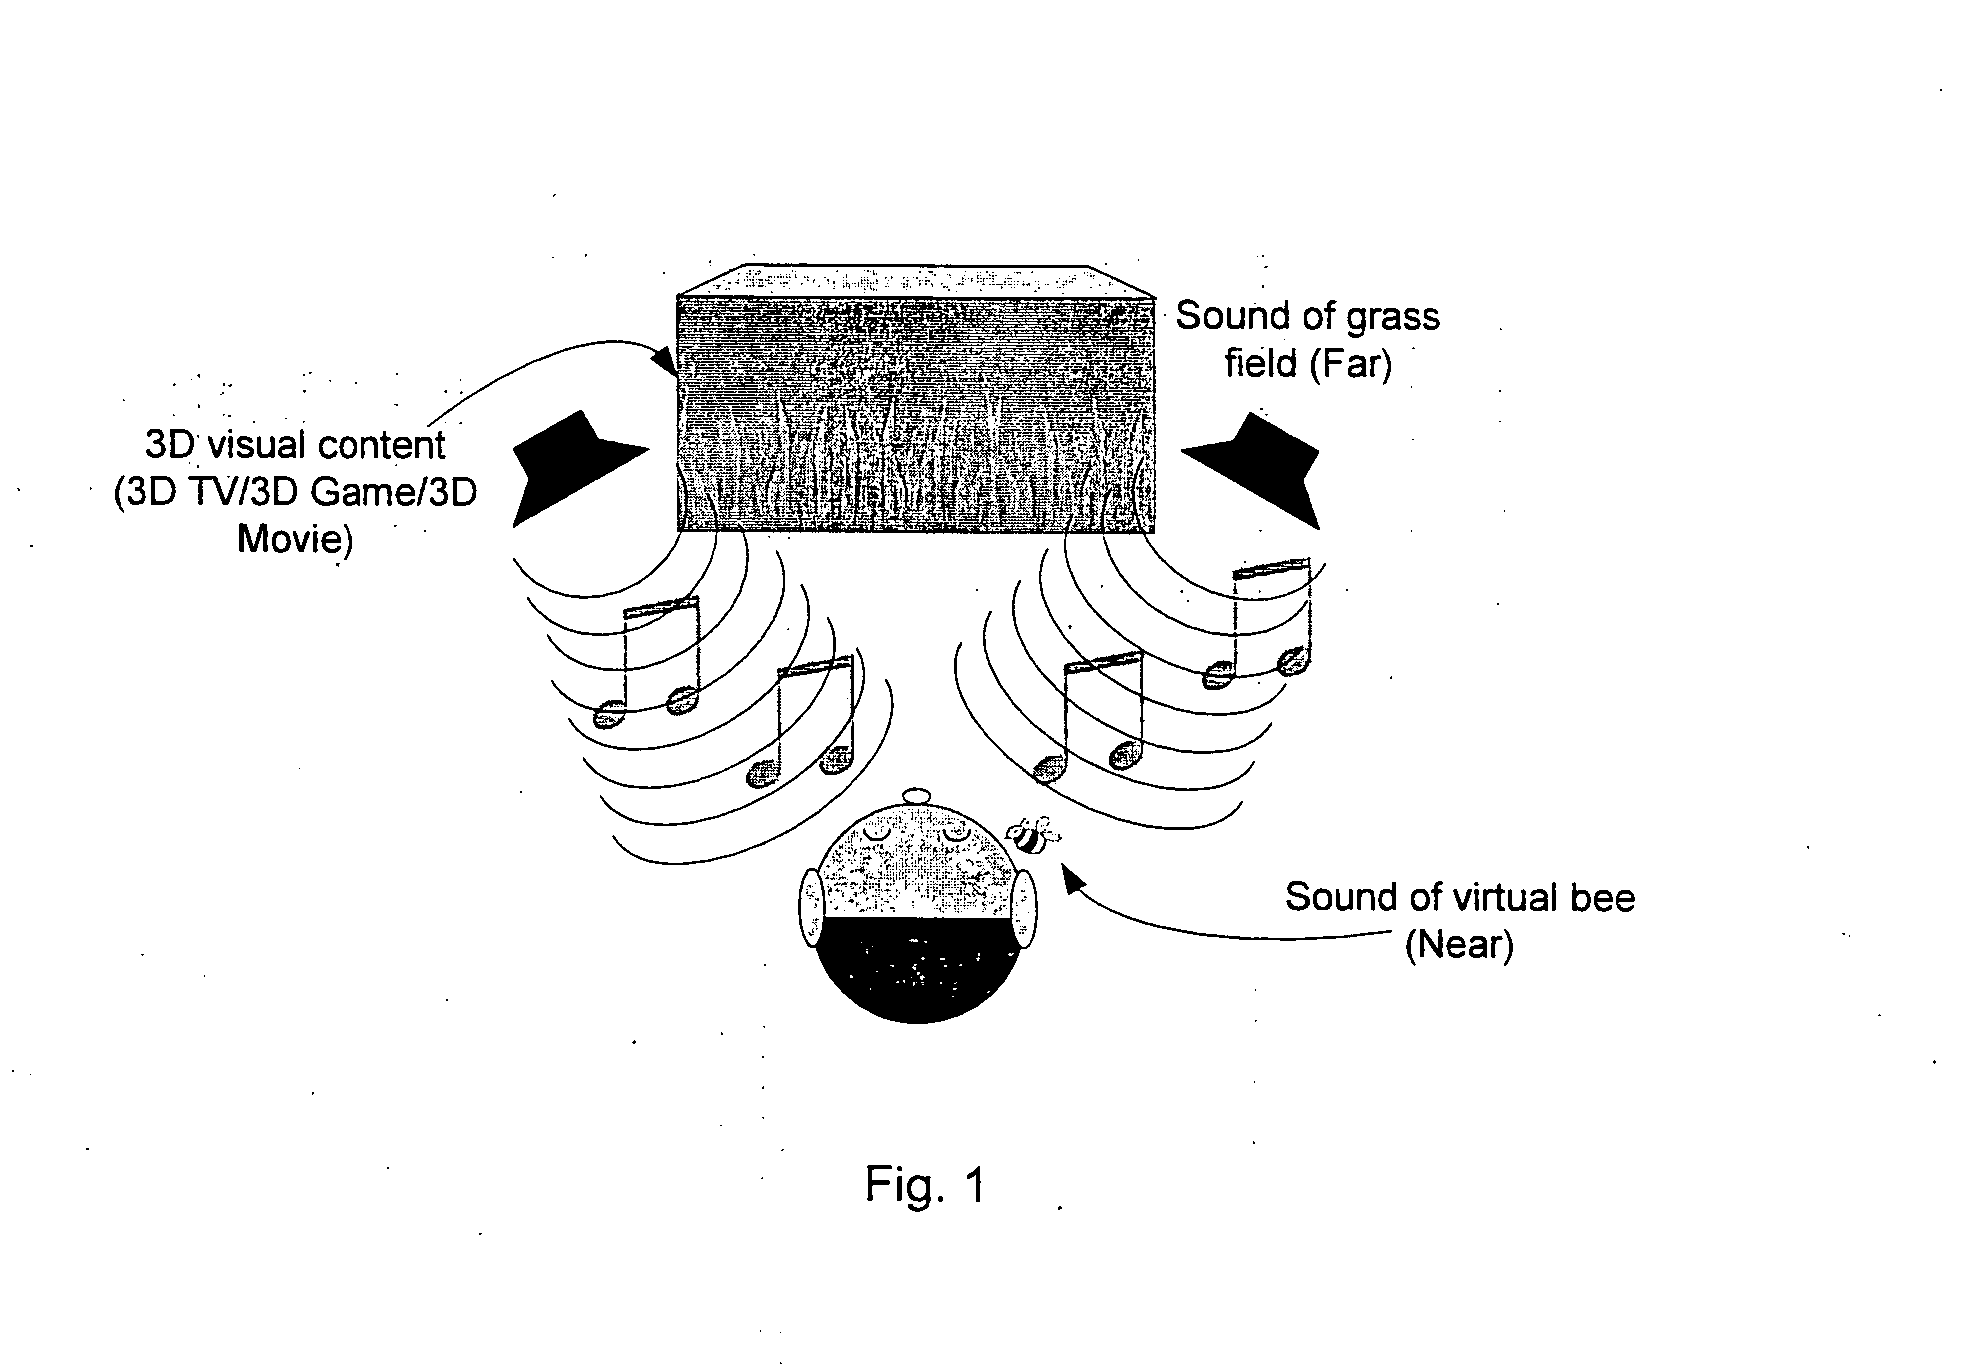 System and method for processing an input signal to produce 3D audio effects